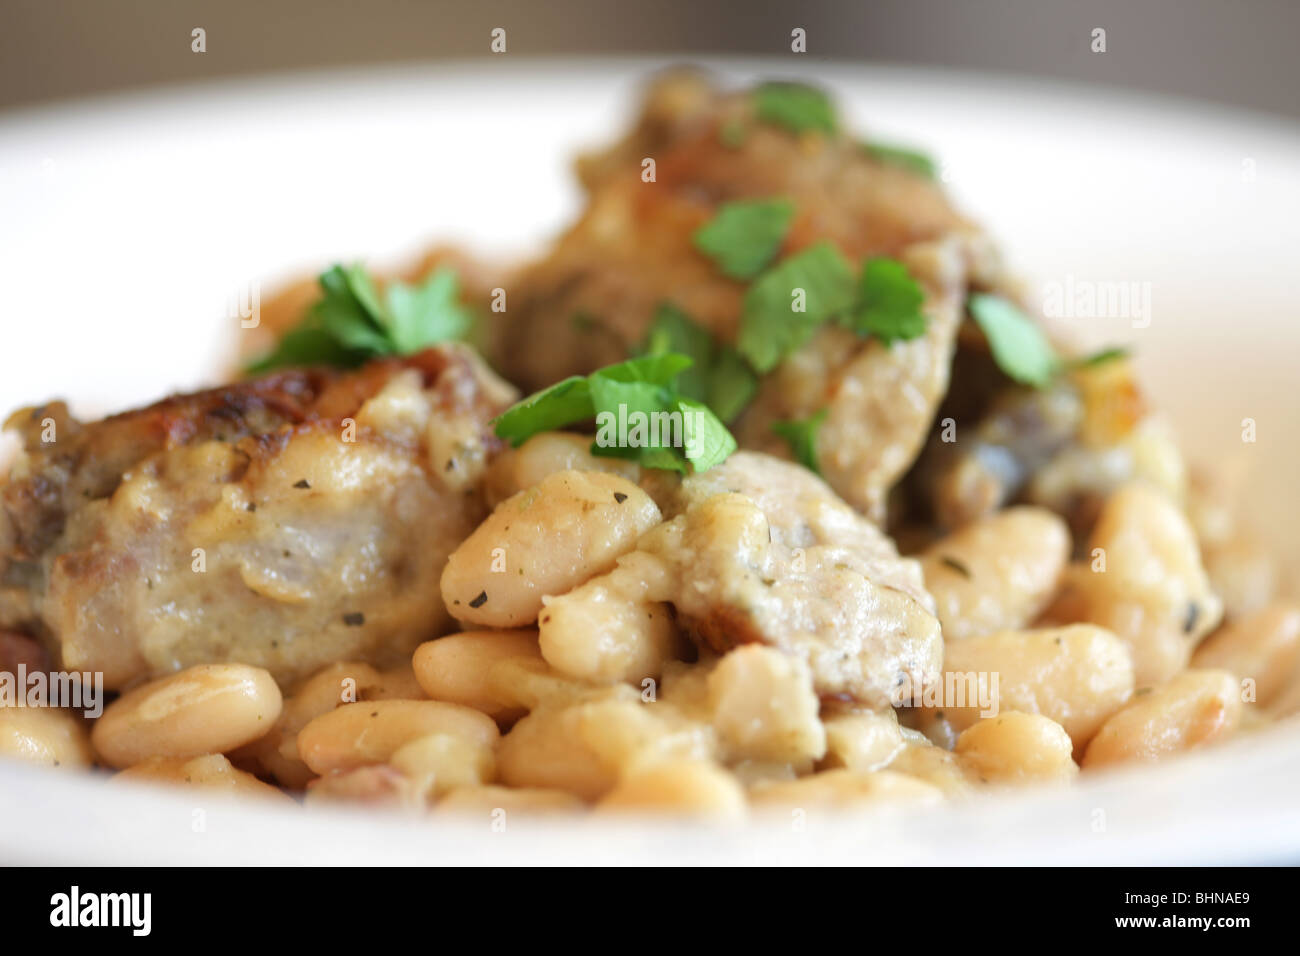 Authentic Traditional French Pork and White Bean Cassoulet Casserole Meal With No People Stock Photo